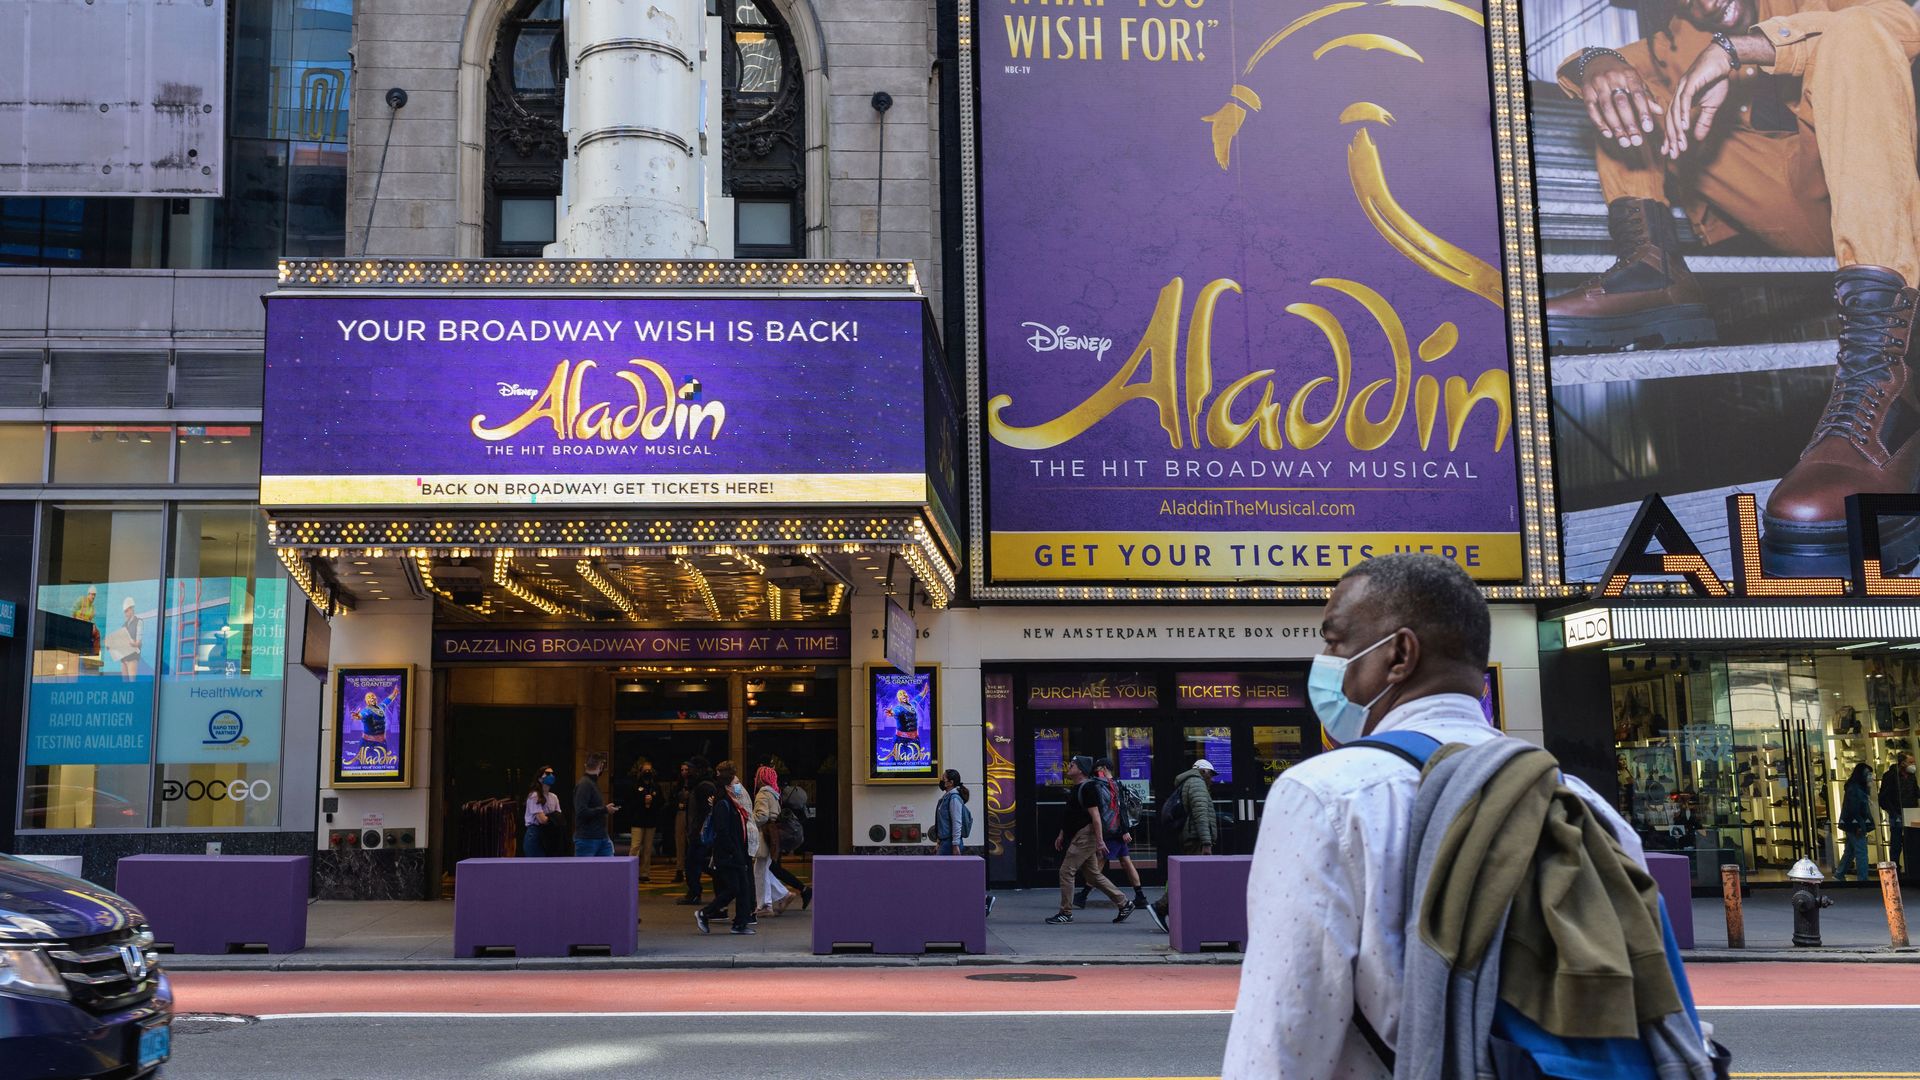 The "Aladdin" Broadway musical displayed outside the New Amsterdam Theatre on Oct. 1 in New York City.